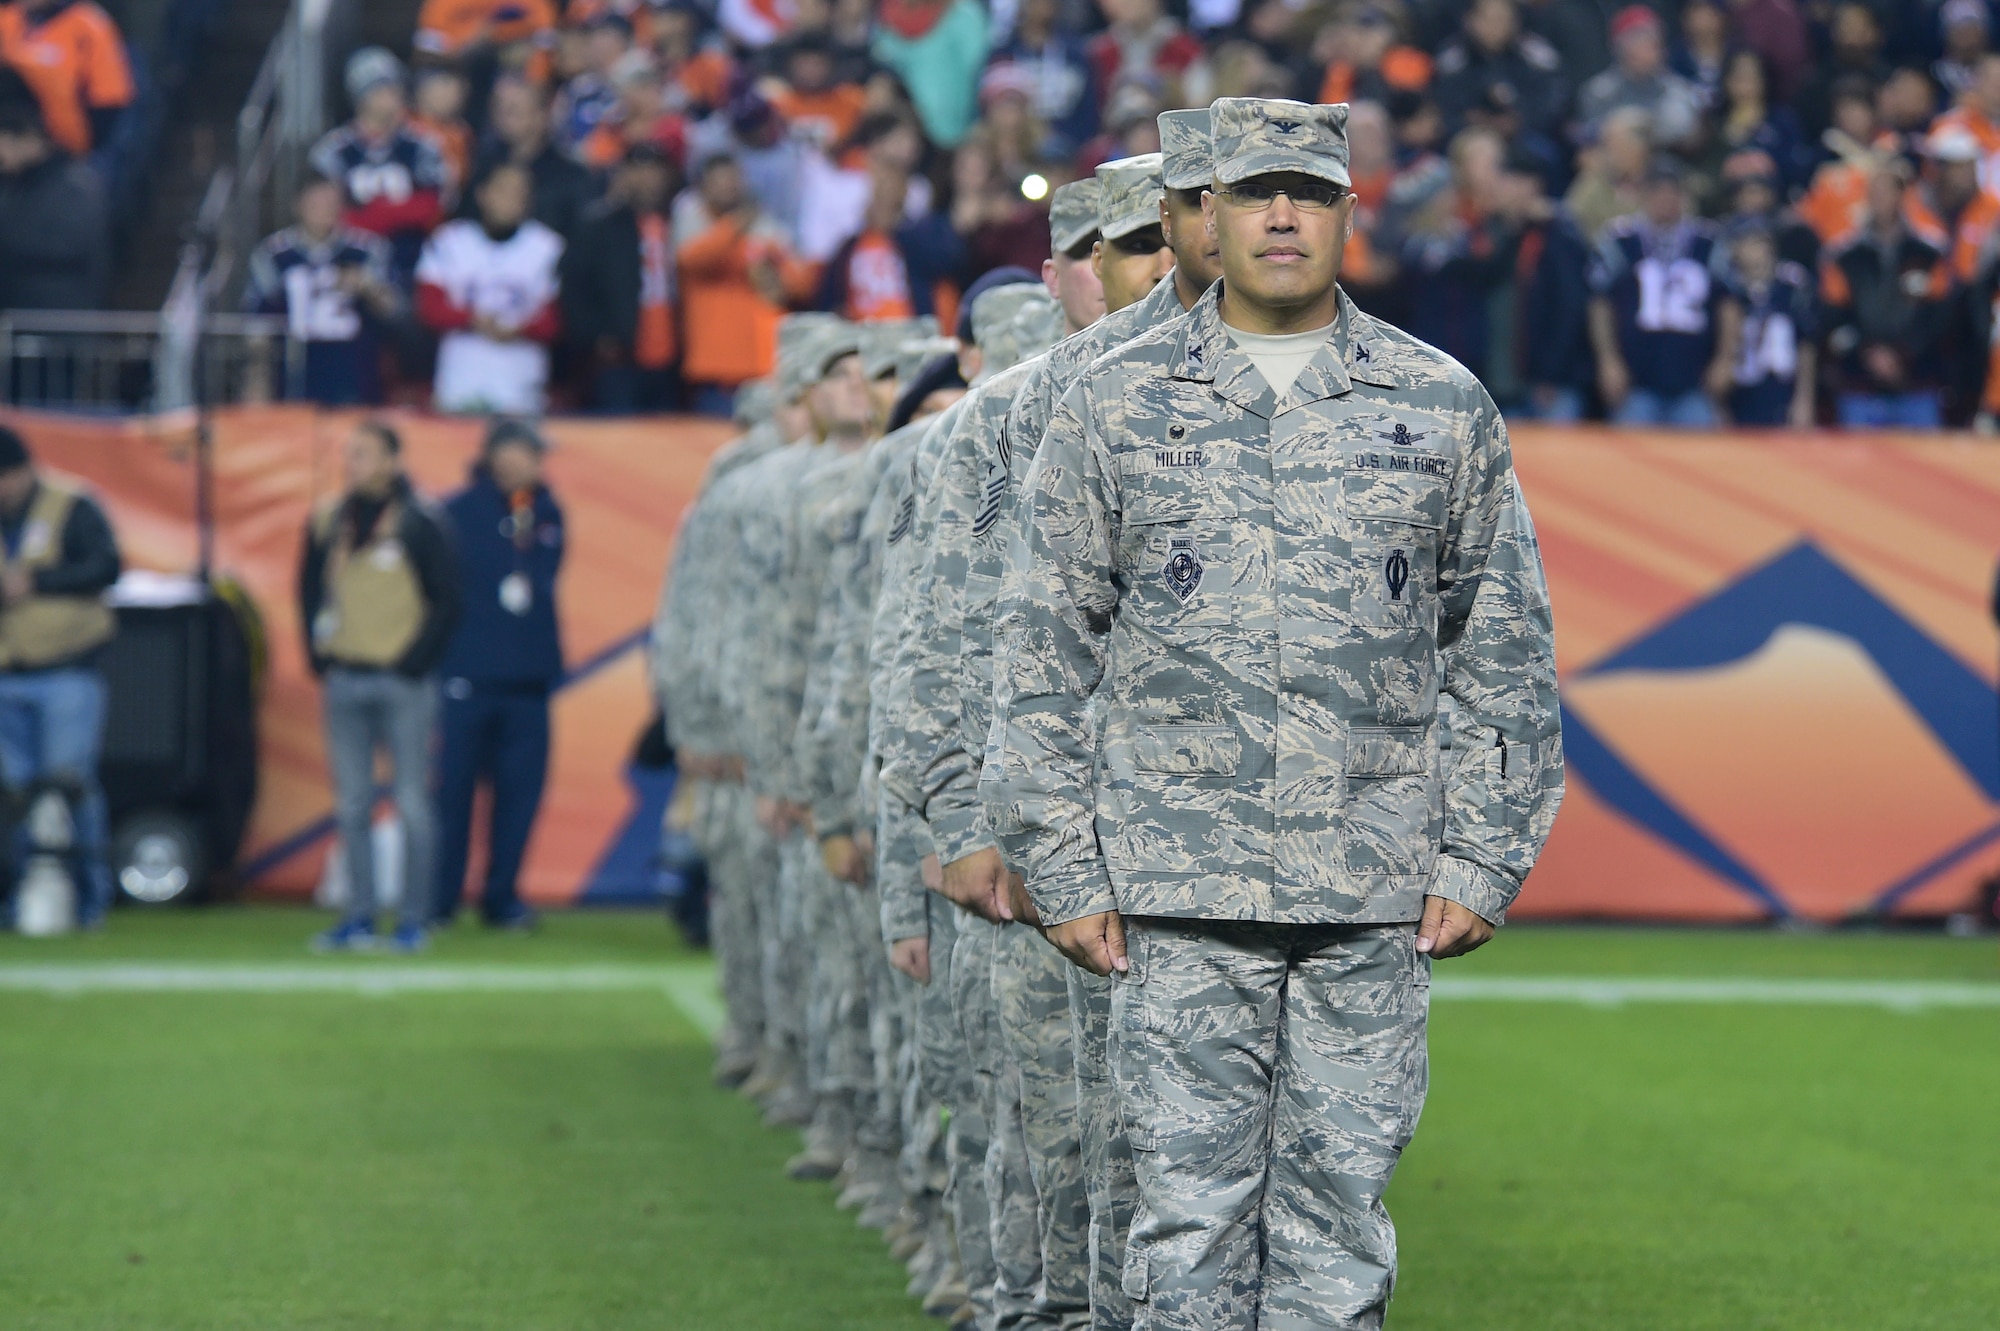 Col. David Miller, Jr., 460th Space Wing commander, leads Buckley Air Force Base members onto the 40-yard line as they prepare for the Salute to Service pre-game ceremony to begin Nov. 12, 2017, at Sports Authority Stadium at Mile High in Denver.